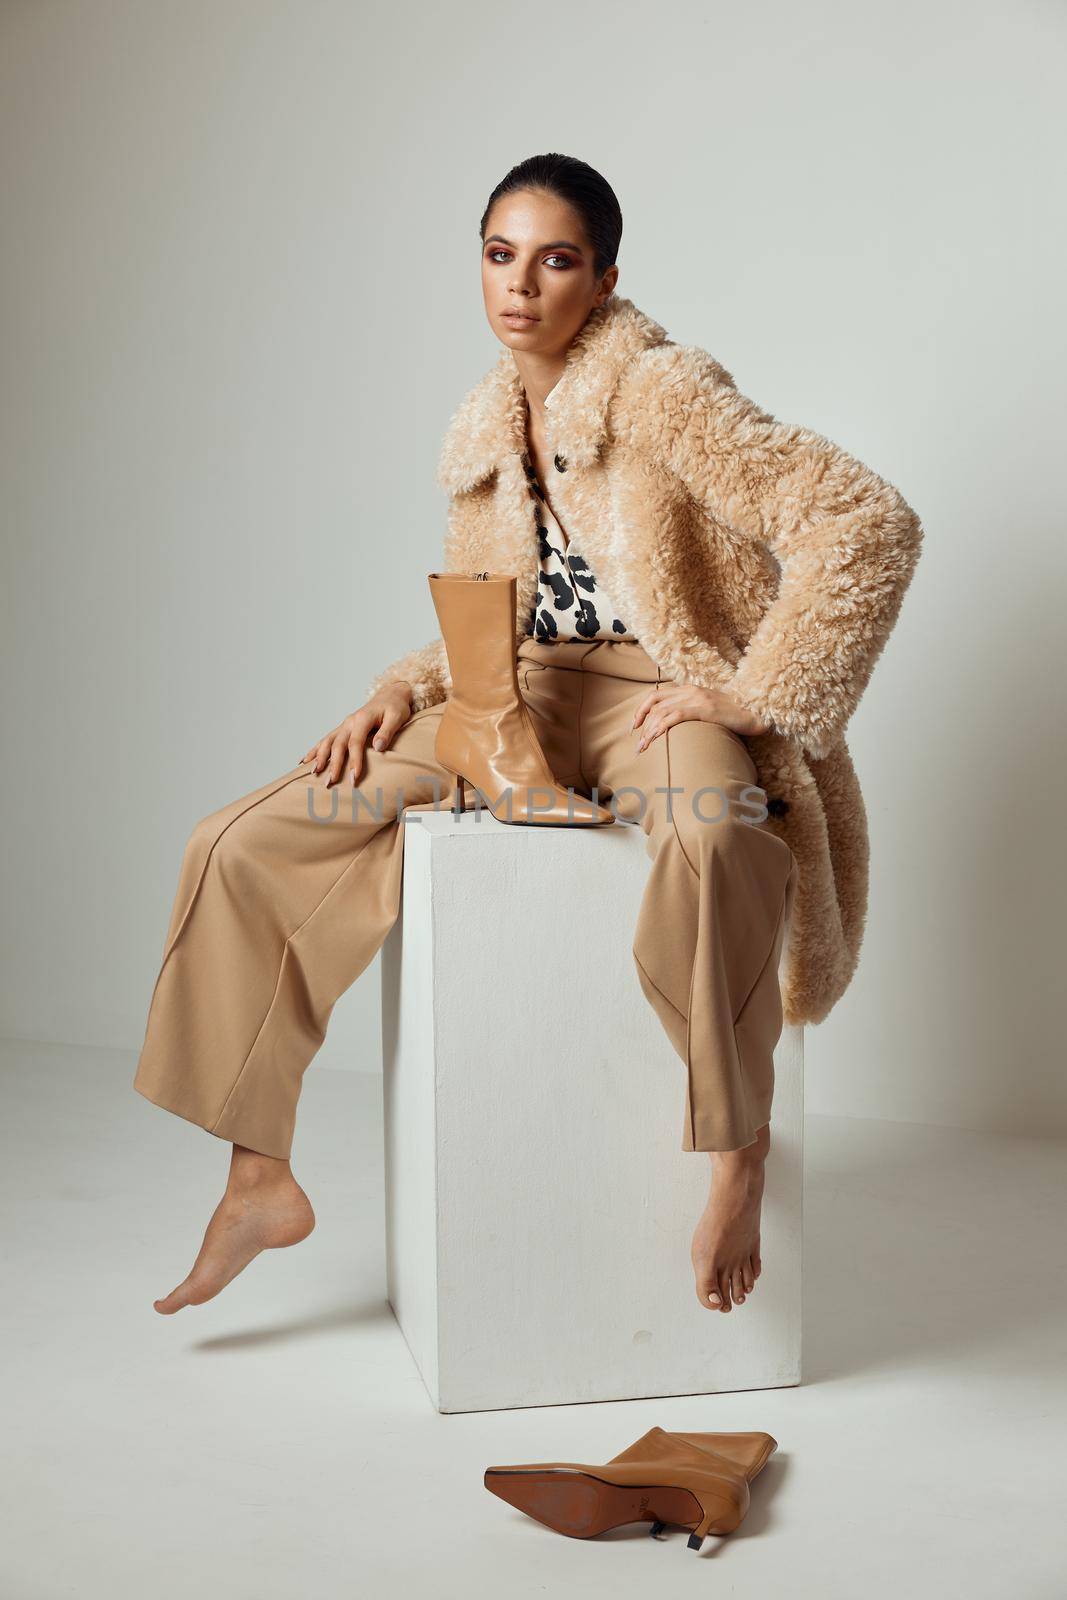 pretty brunette in a beige fur coat autumn style fashion barefoot. High quality photo